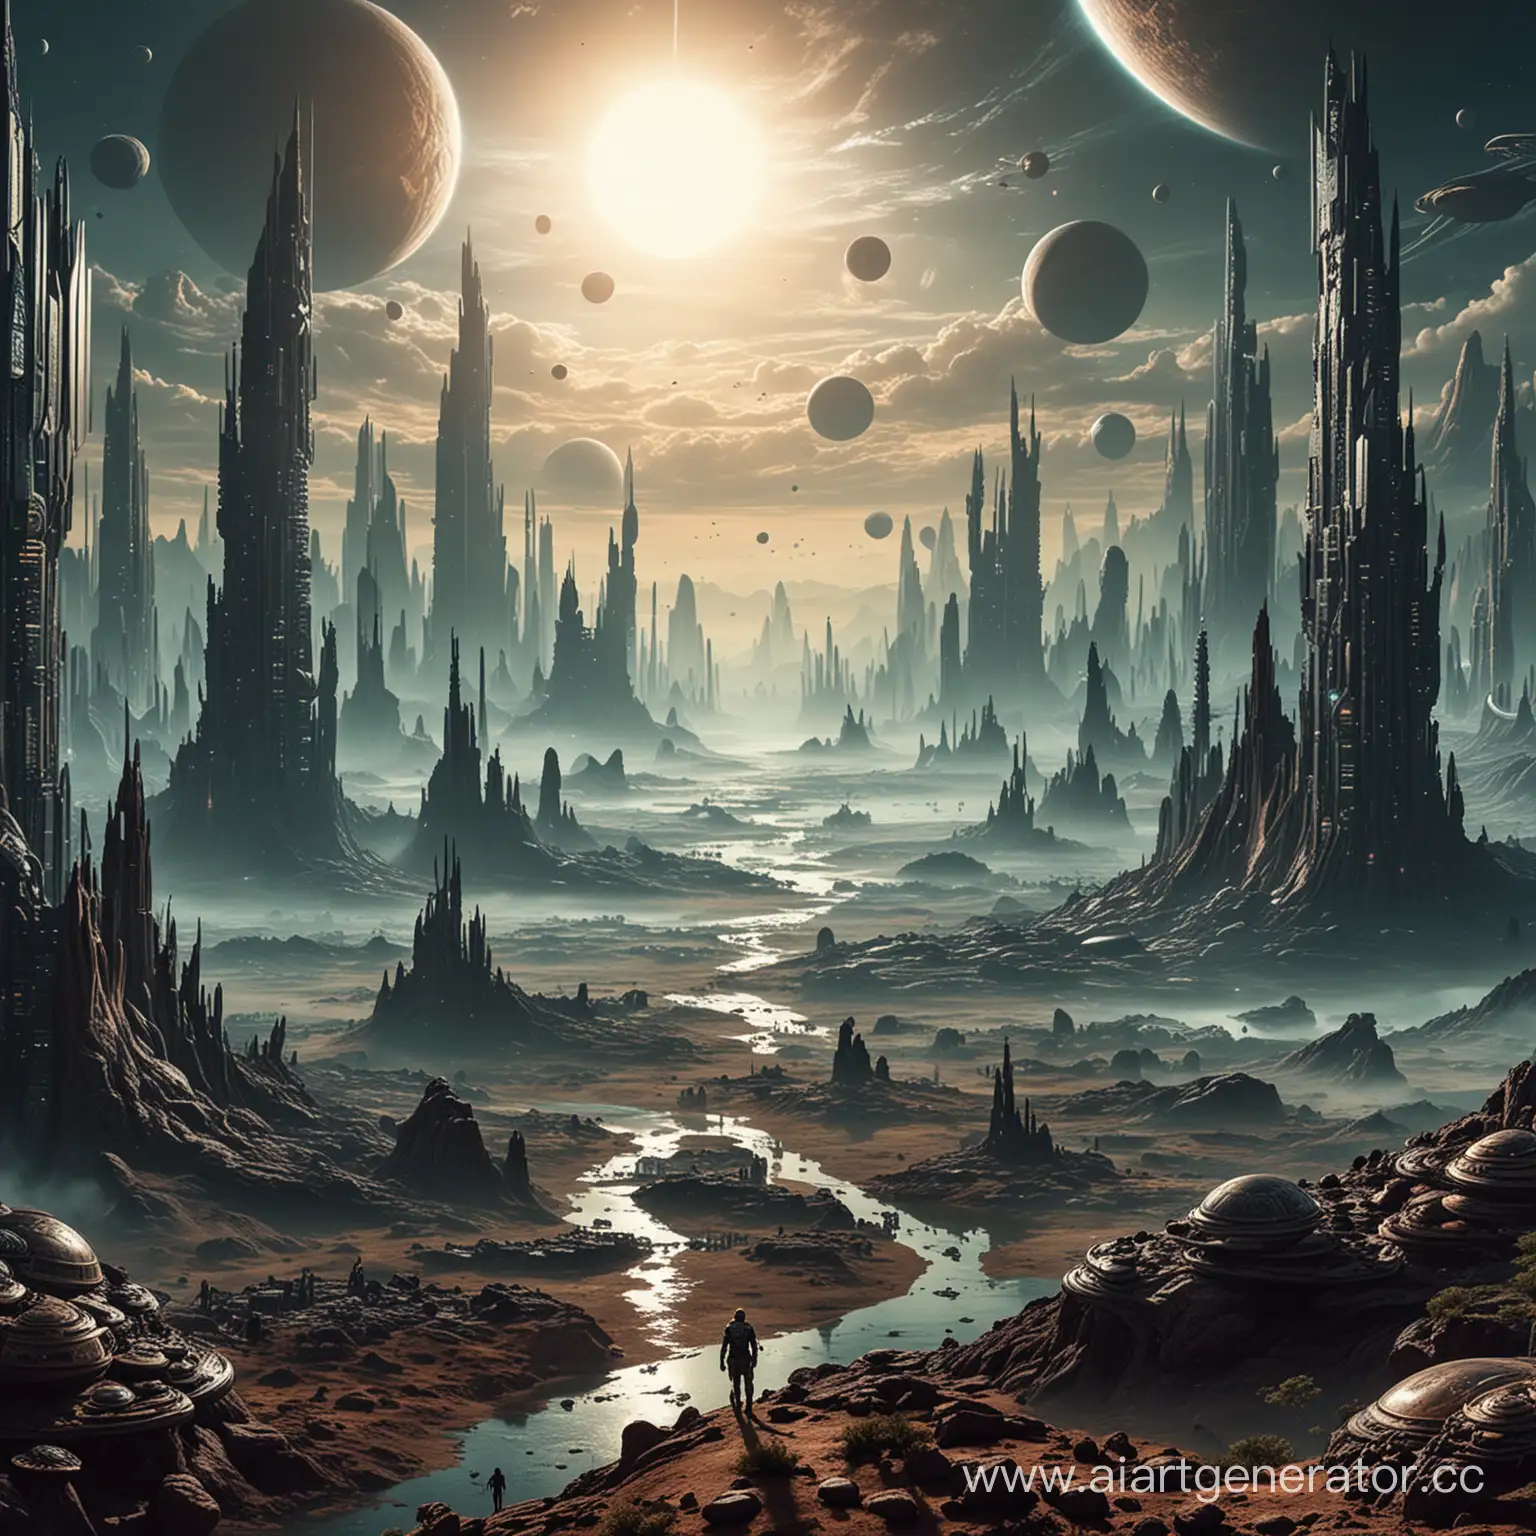 A surreal planet with a megalopolis of aliens